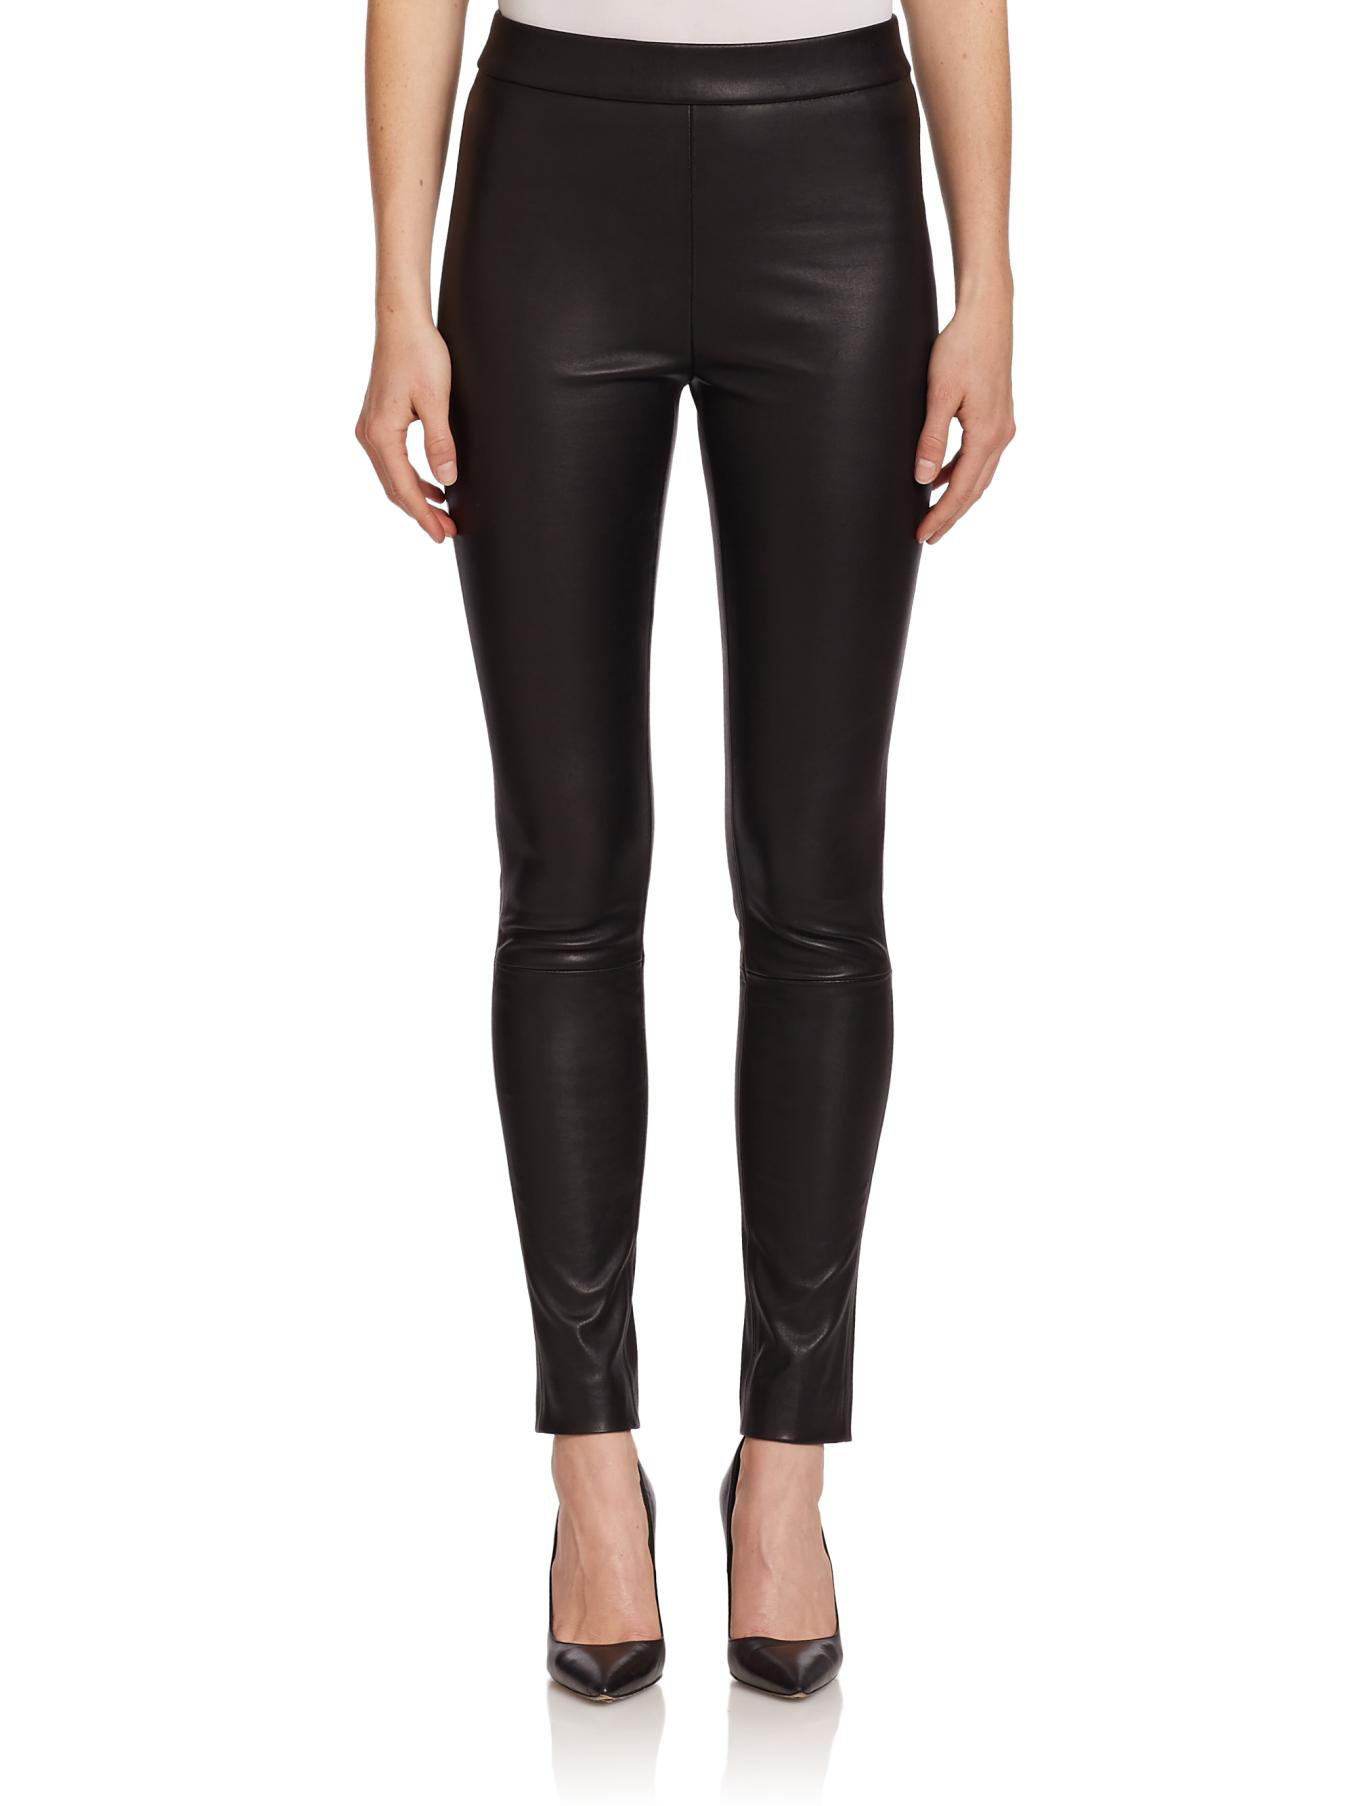 Lyst - Theory Adbelle Leather Leggings in Black